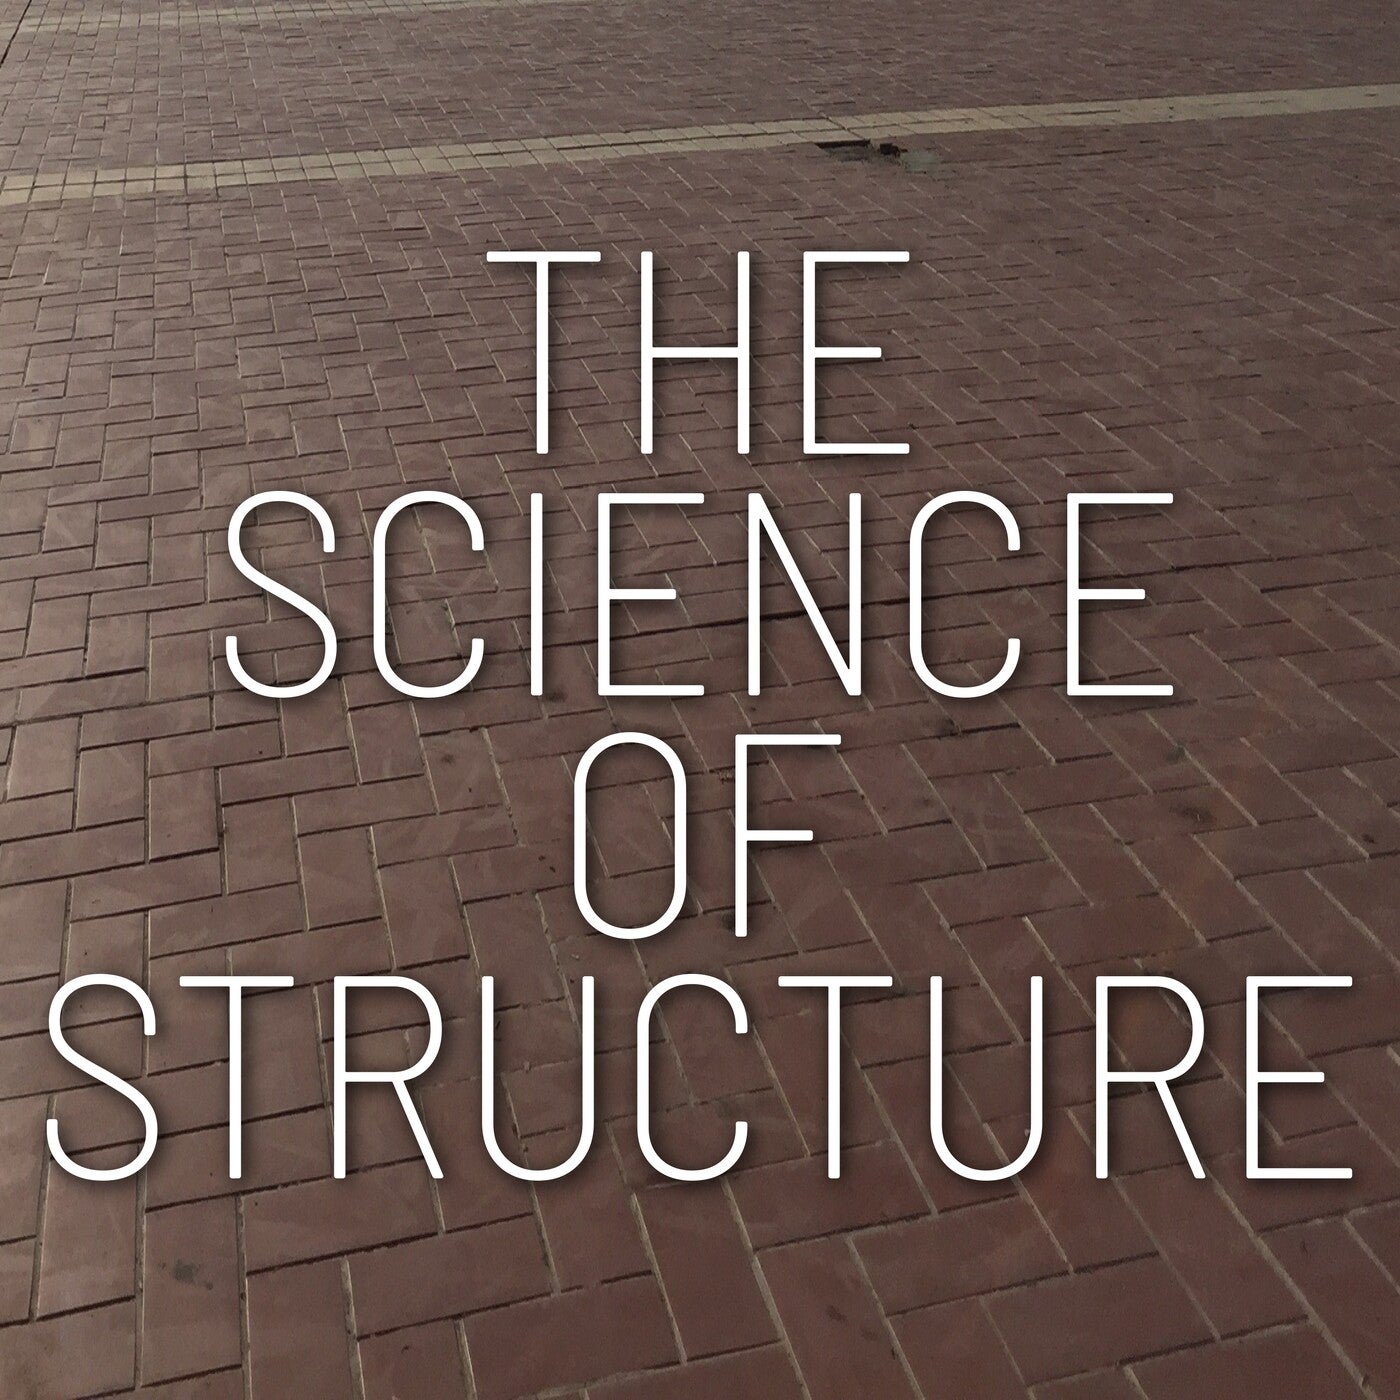 The Science of Structure